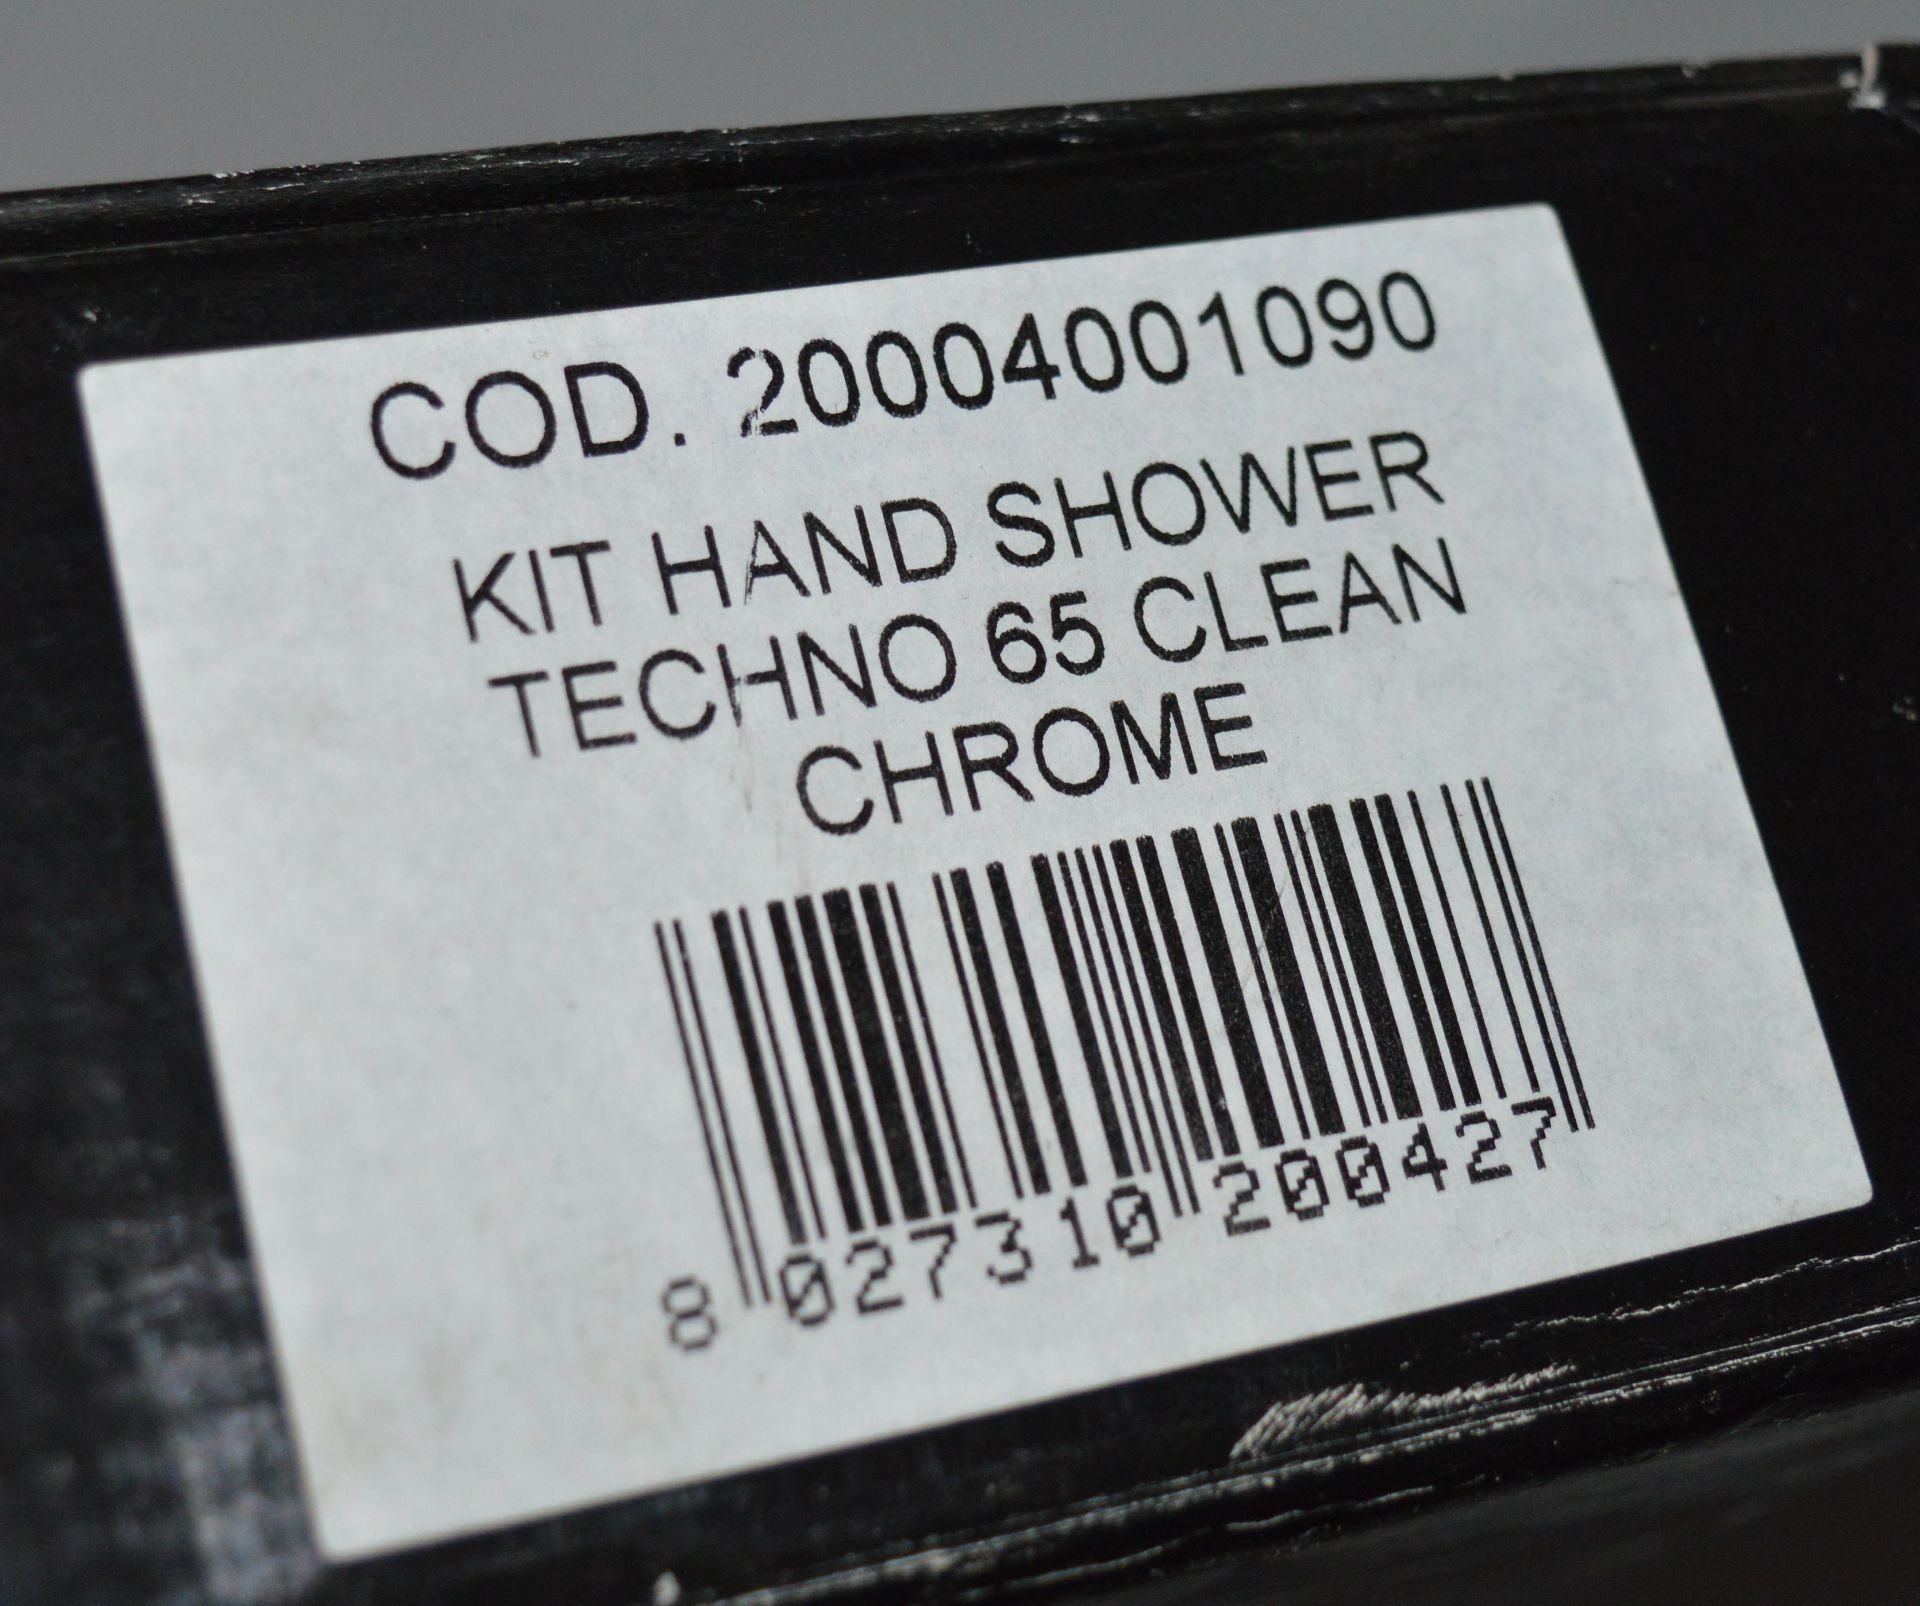 1 x Bath Store Techno 65 Shower Kit - Modern Chrome Finish - Unused Boxed Stock - CL011 - Includes - Image 3 of 4